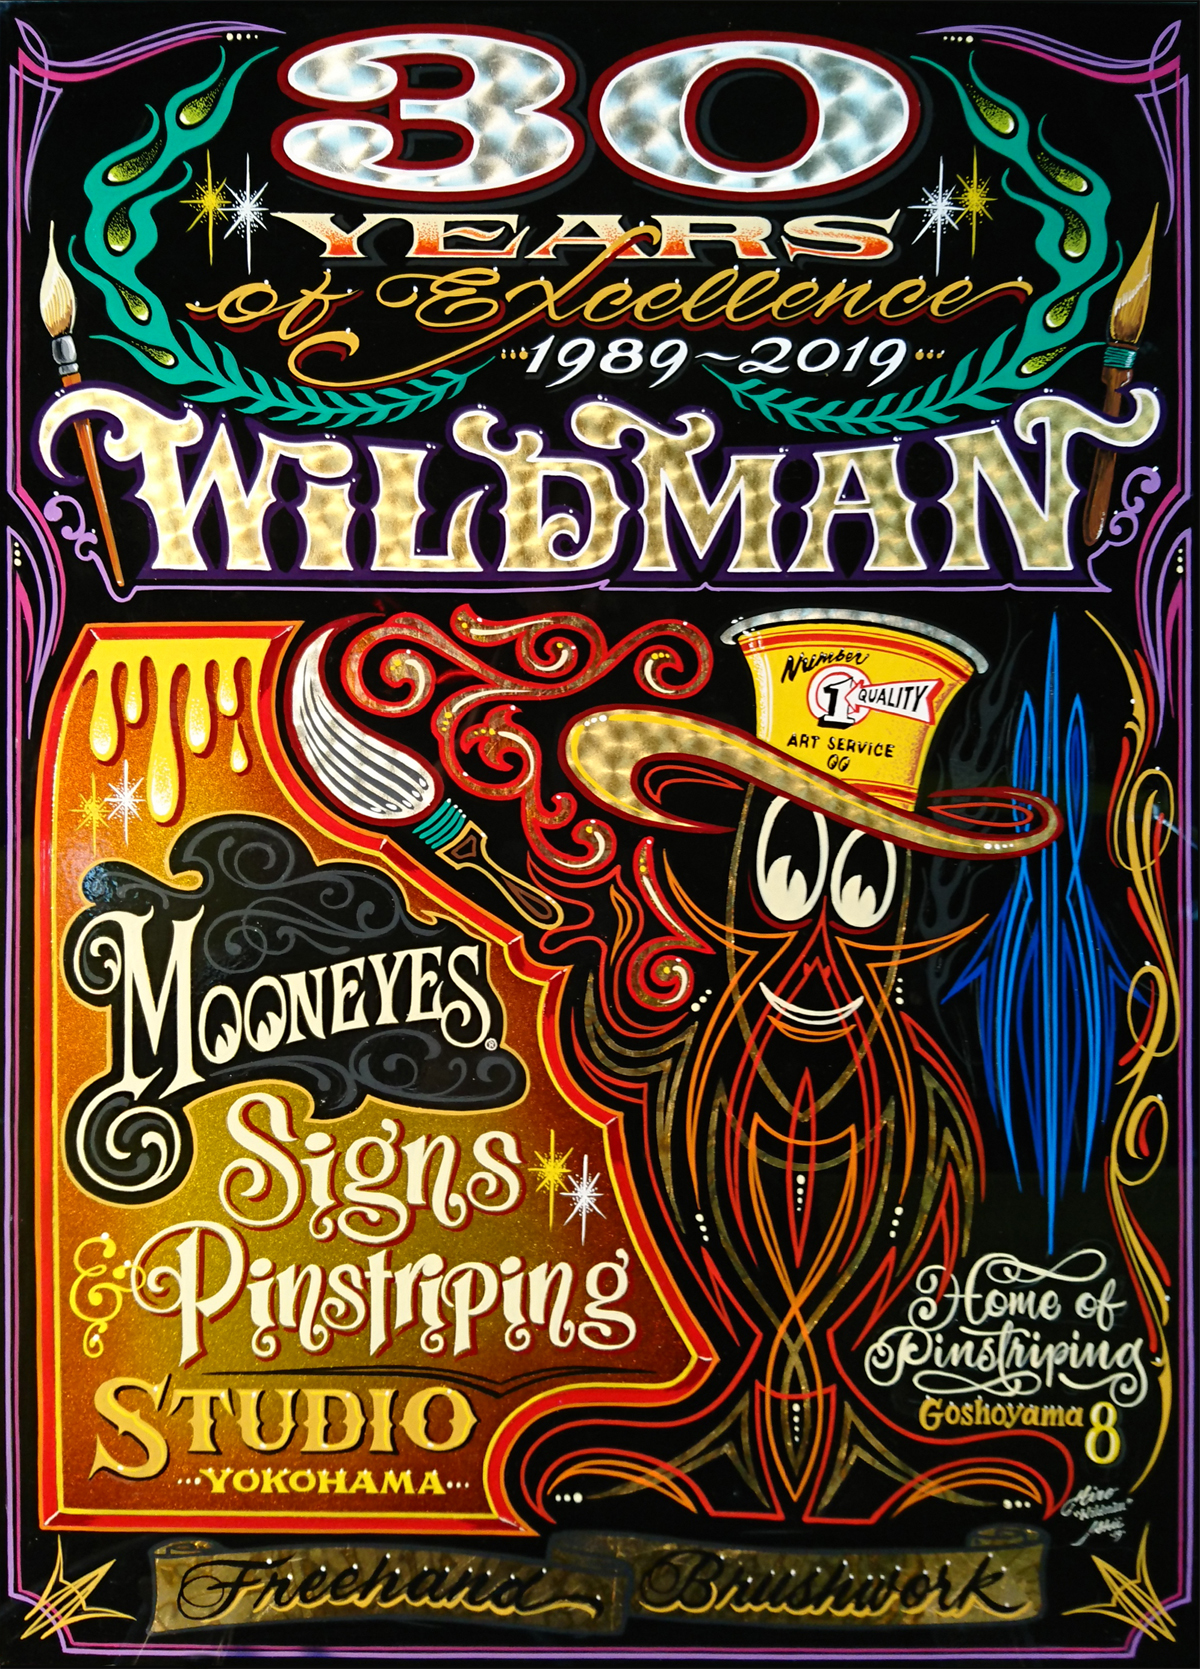 Wildman's 30 Years Excellence